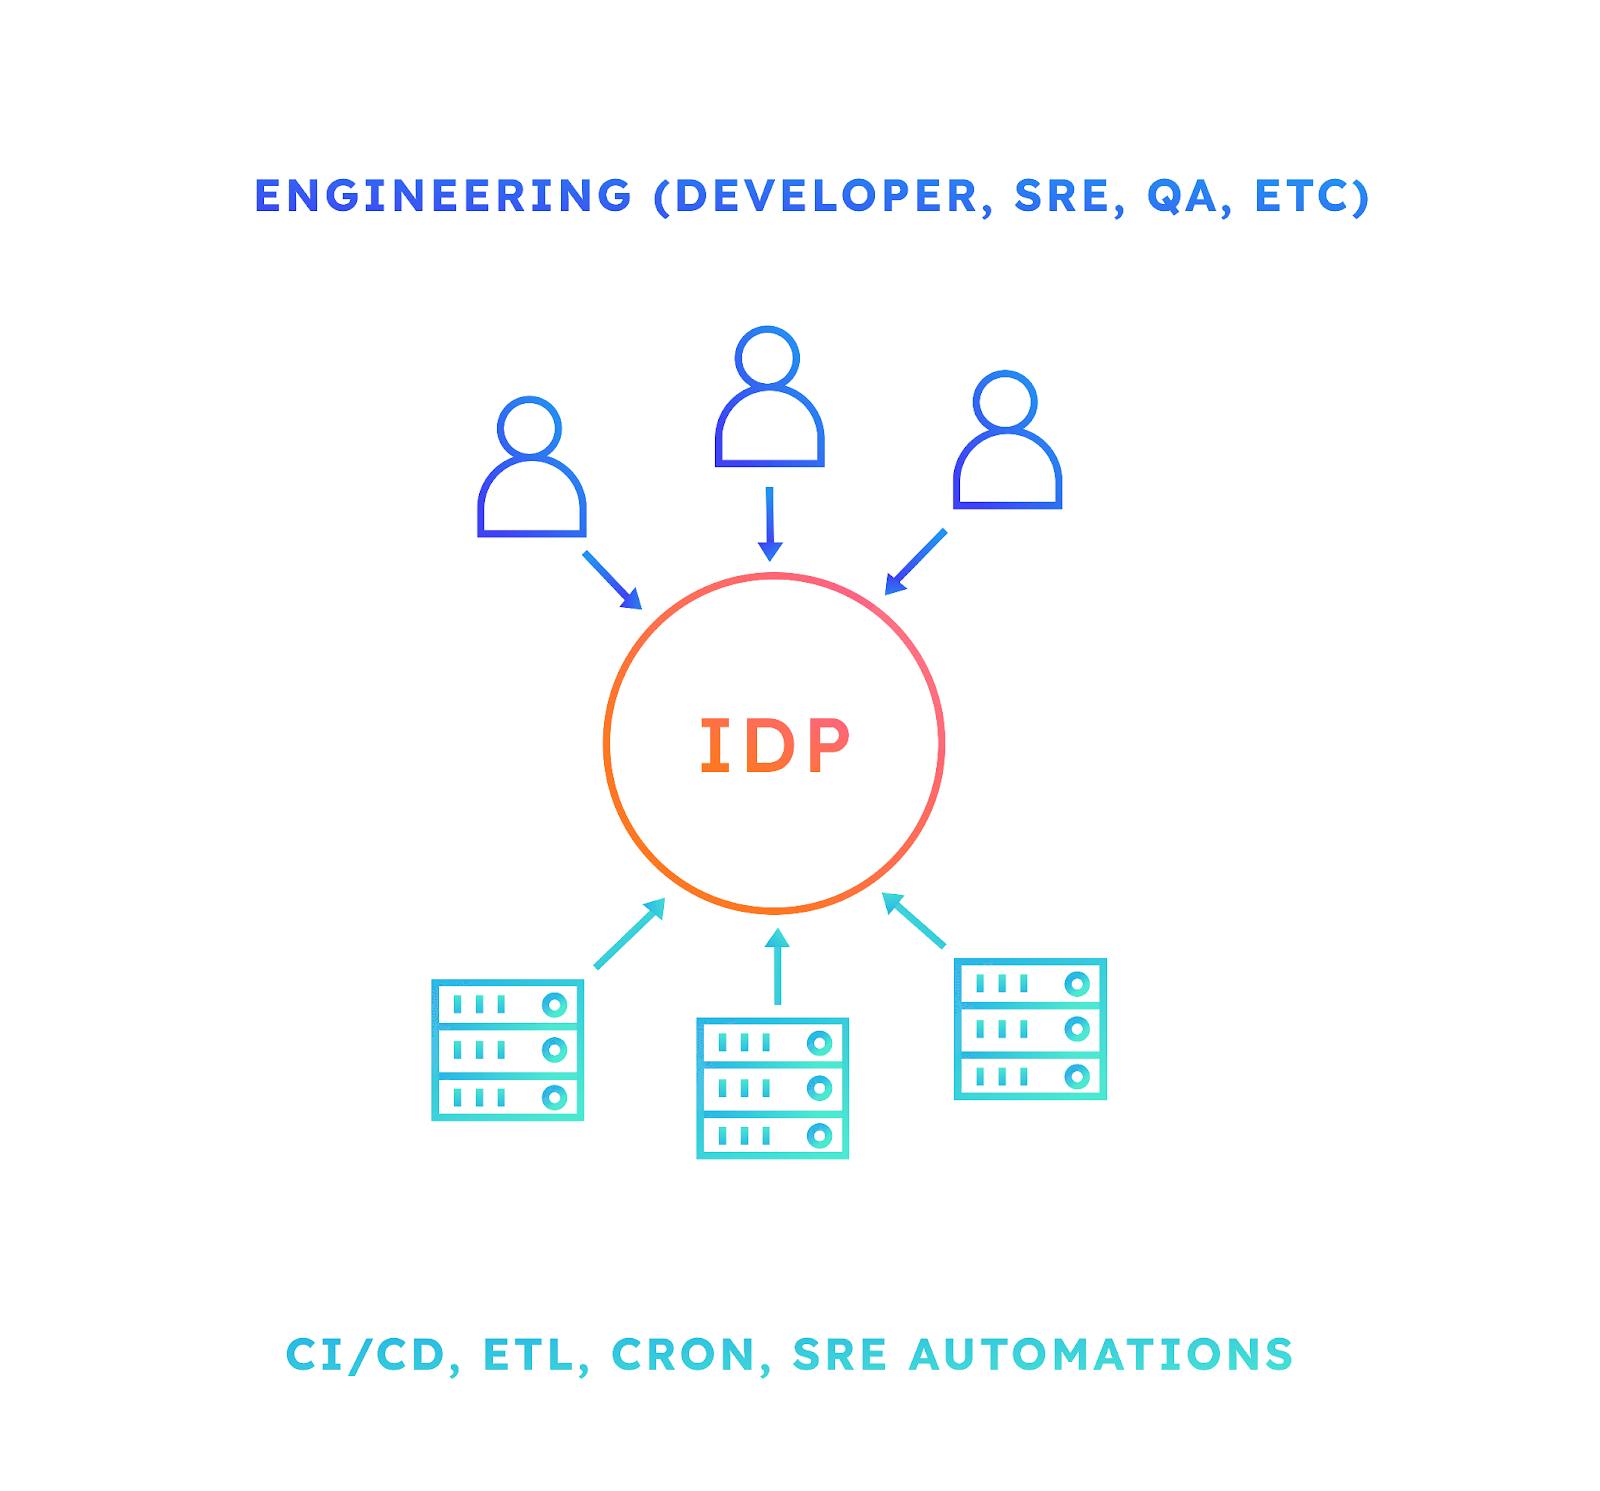 Centralized access, IDP streamlines engineering and automation workflows. Source: https://www.getport.io/blog/guide-to-internal-developer-portals 